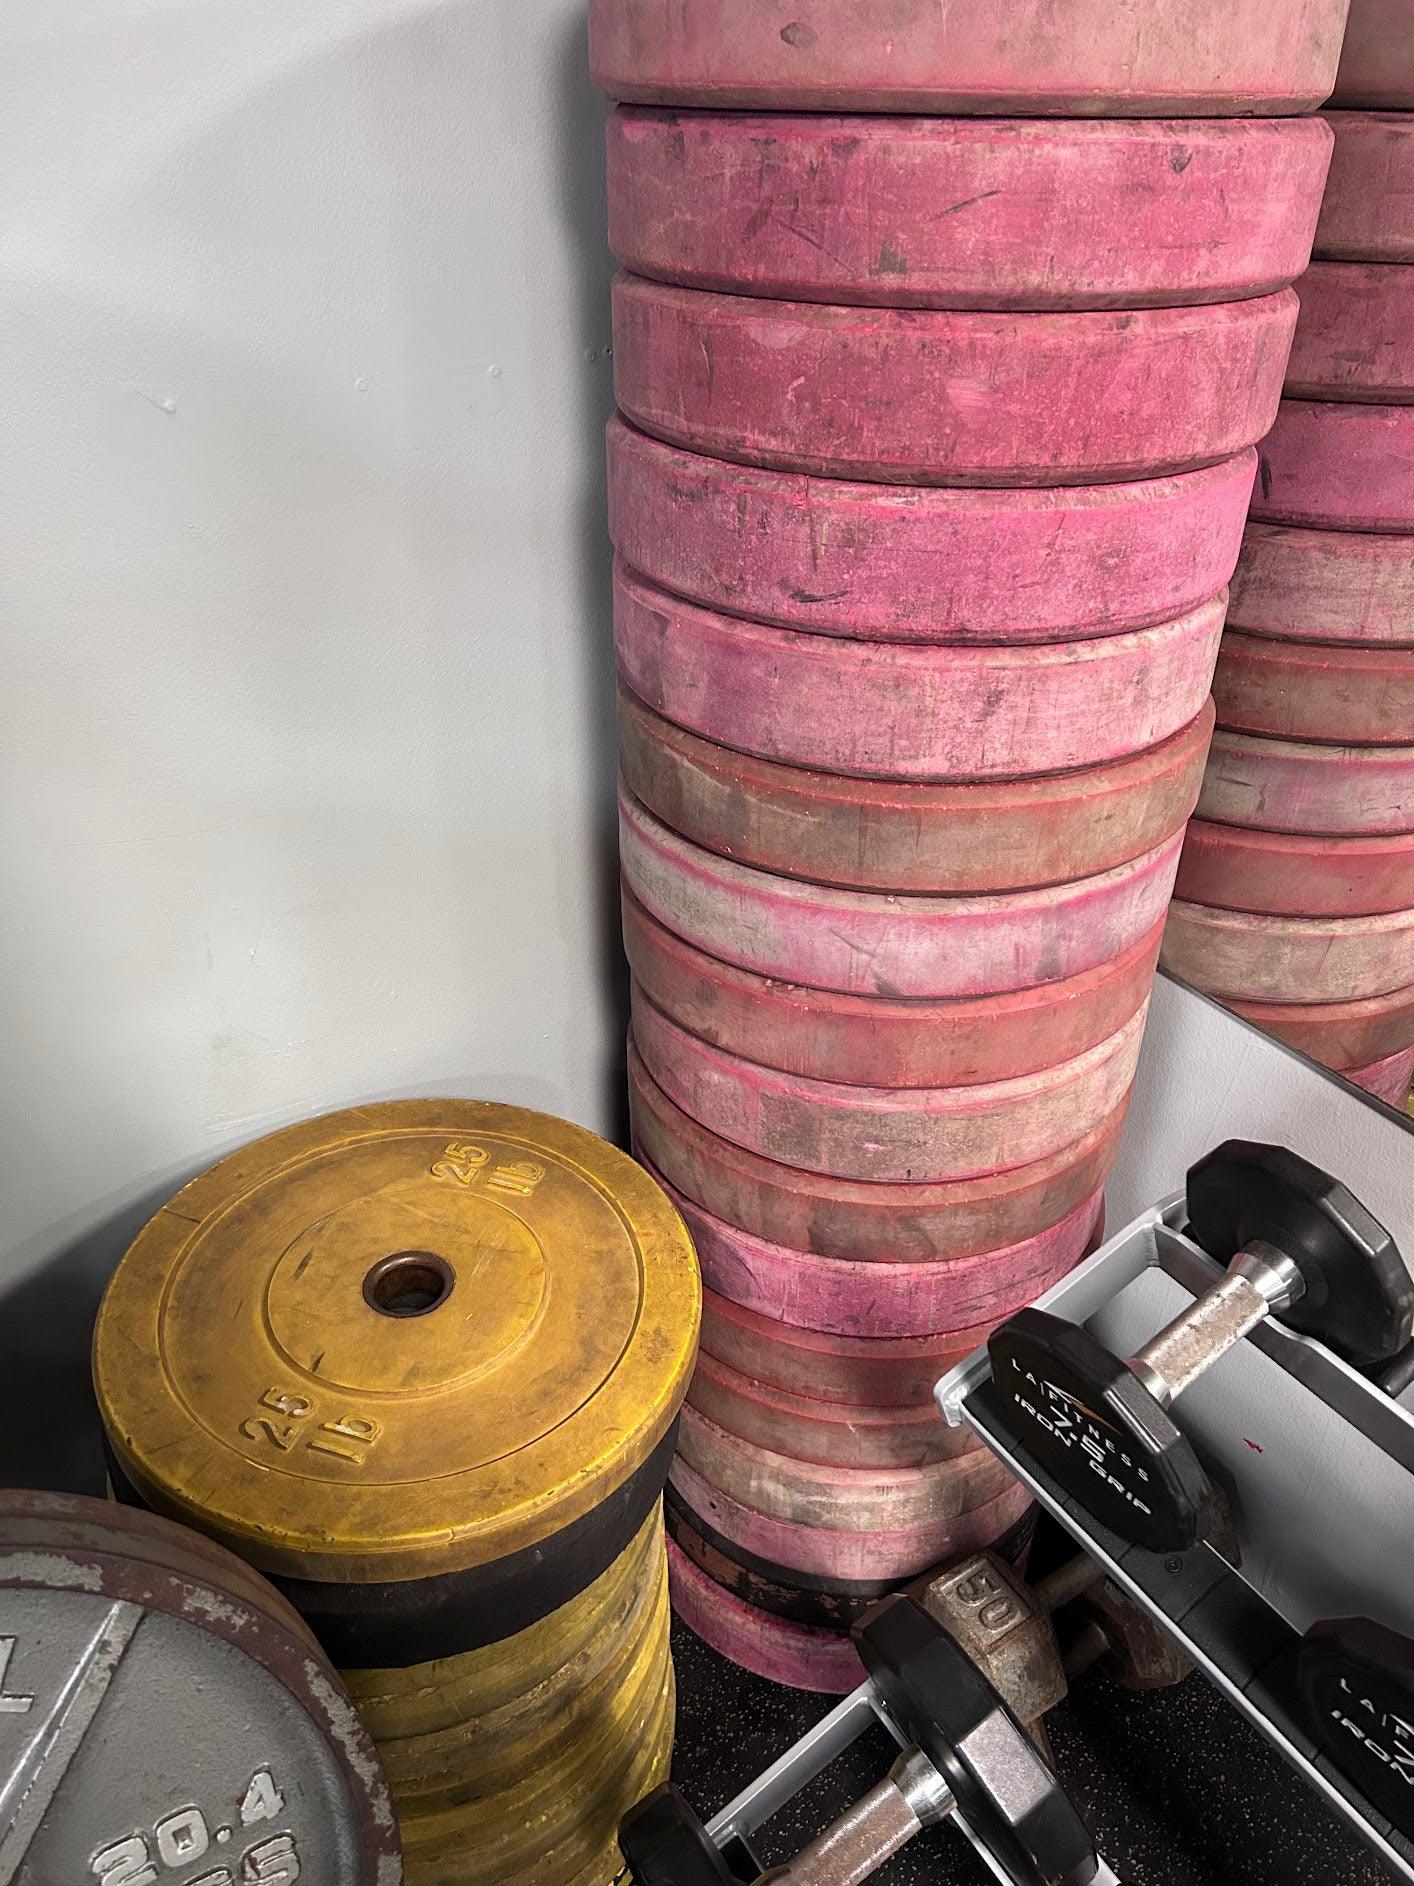 Pre-Owned York Colored 25 & 45lb Plates - priced per pound - ExerciseUnlimited